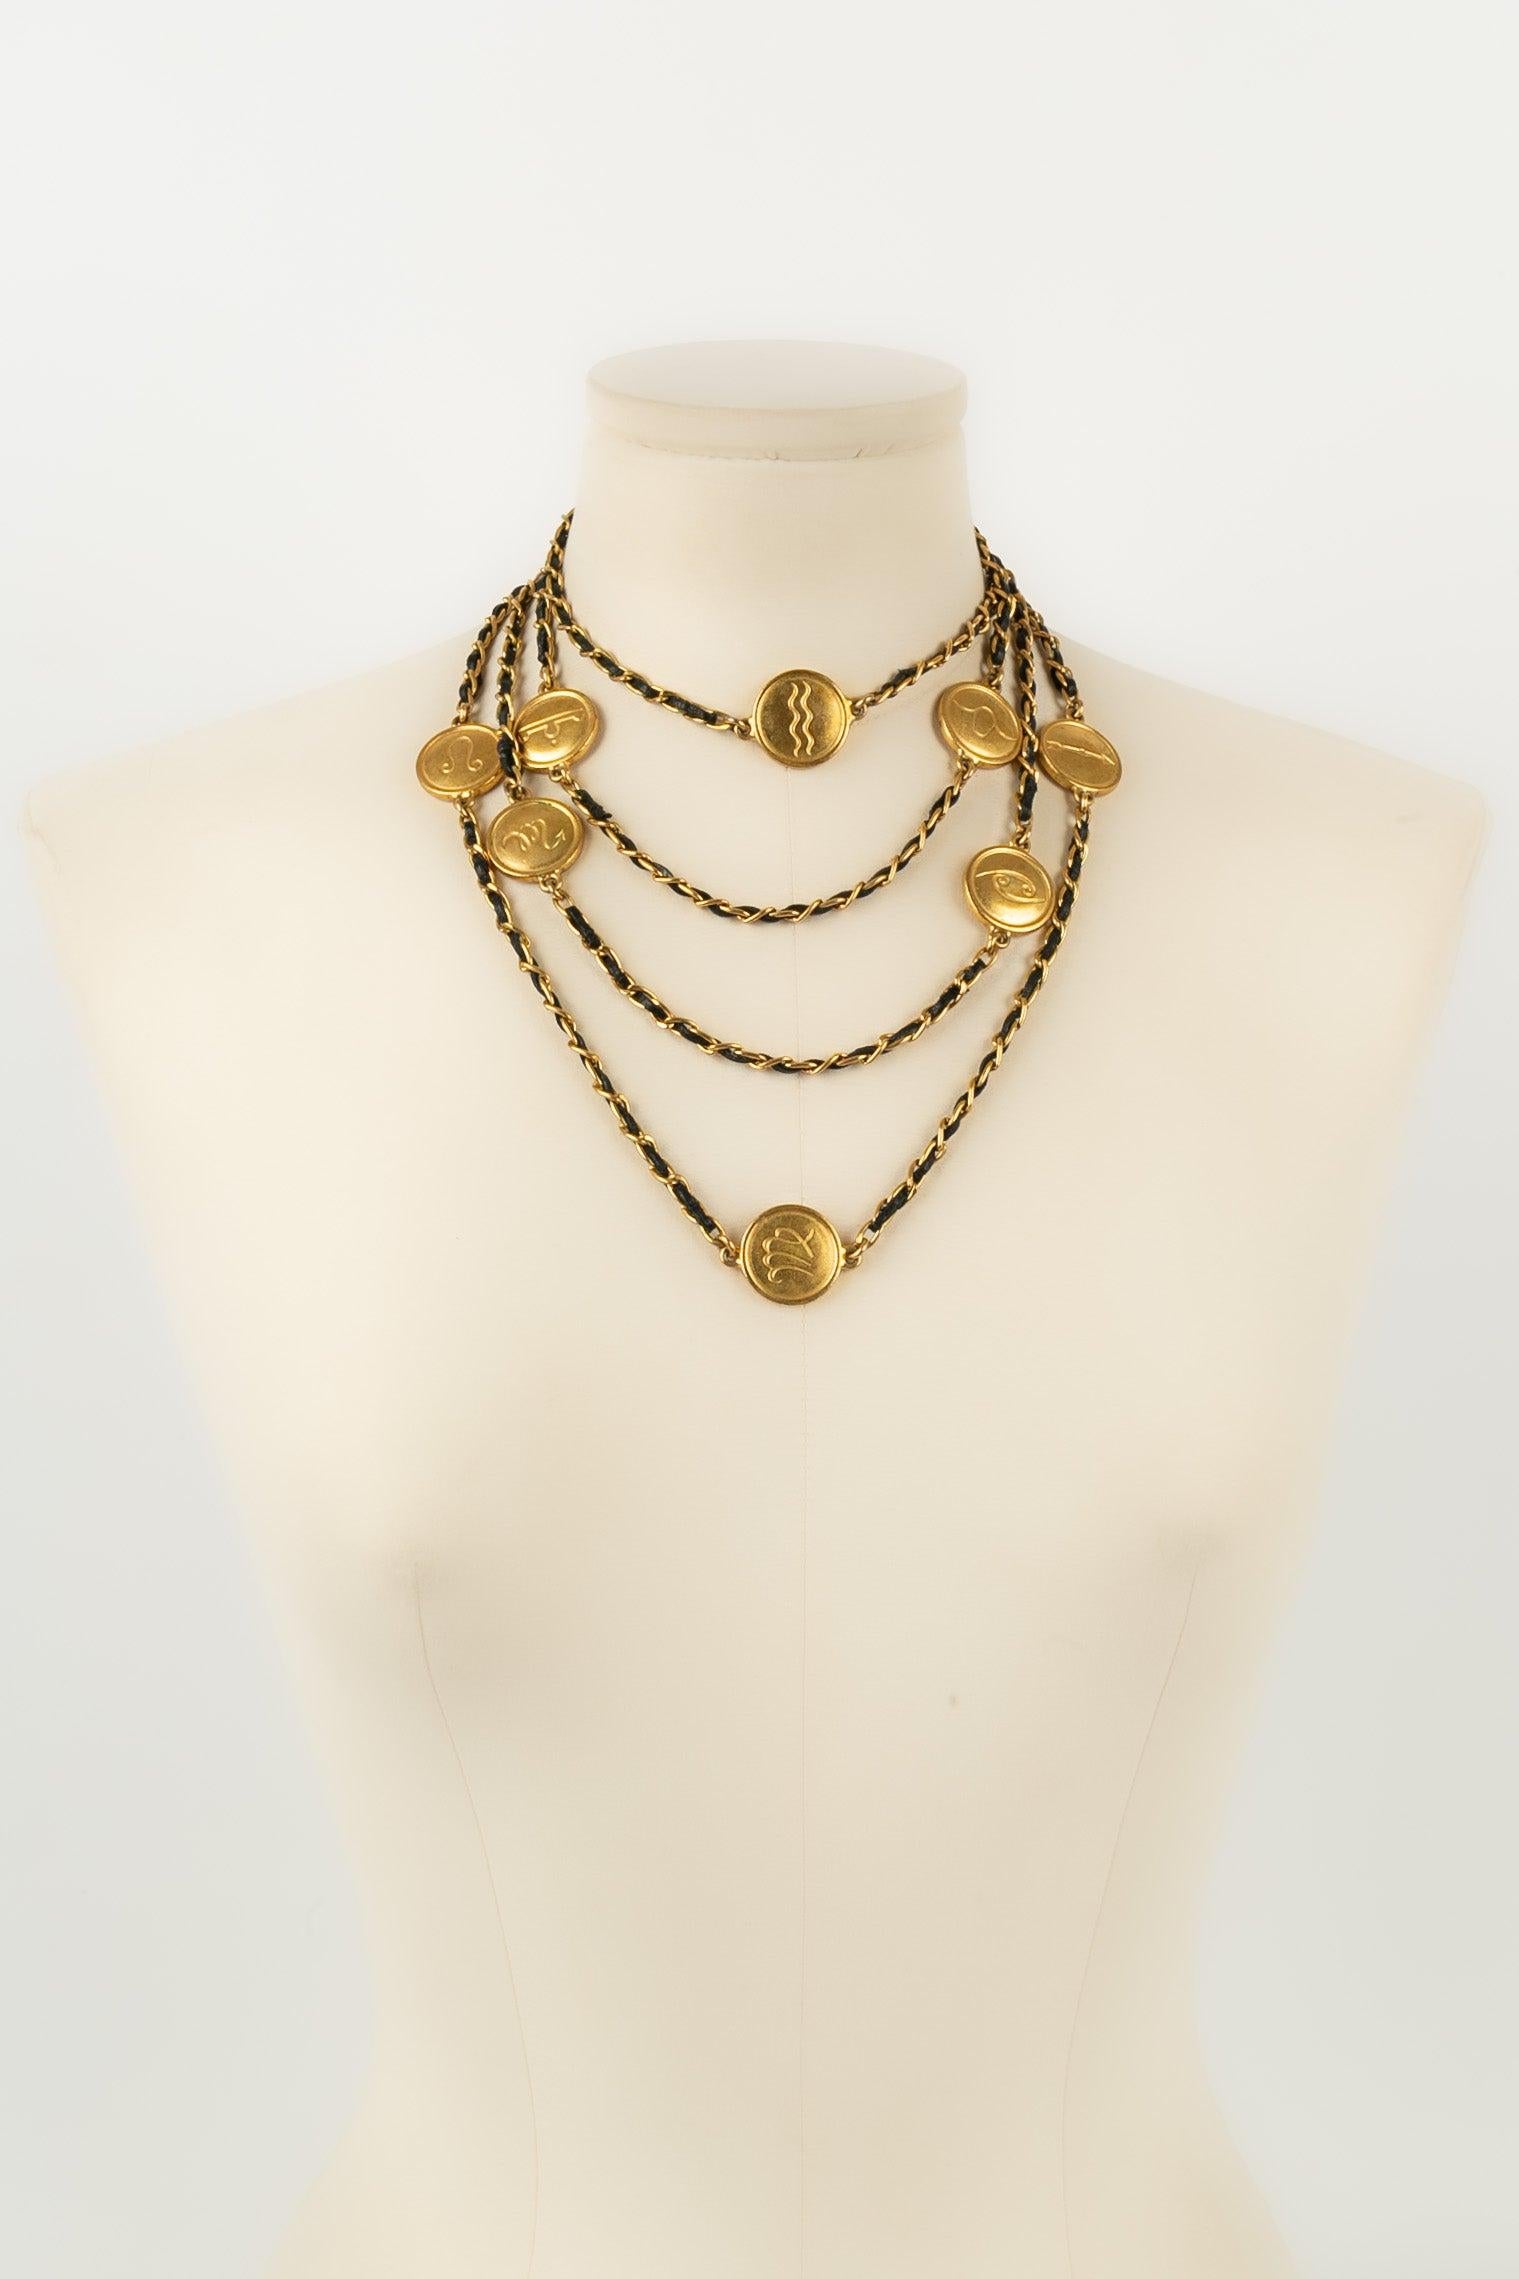 Women's Chanel Necklace / Sautoir in Gold-Plated Metal, 1995 For Sale